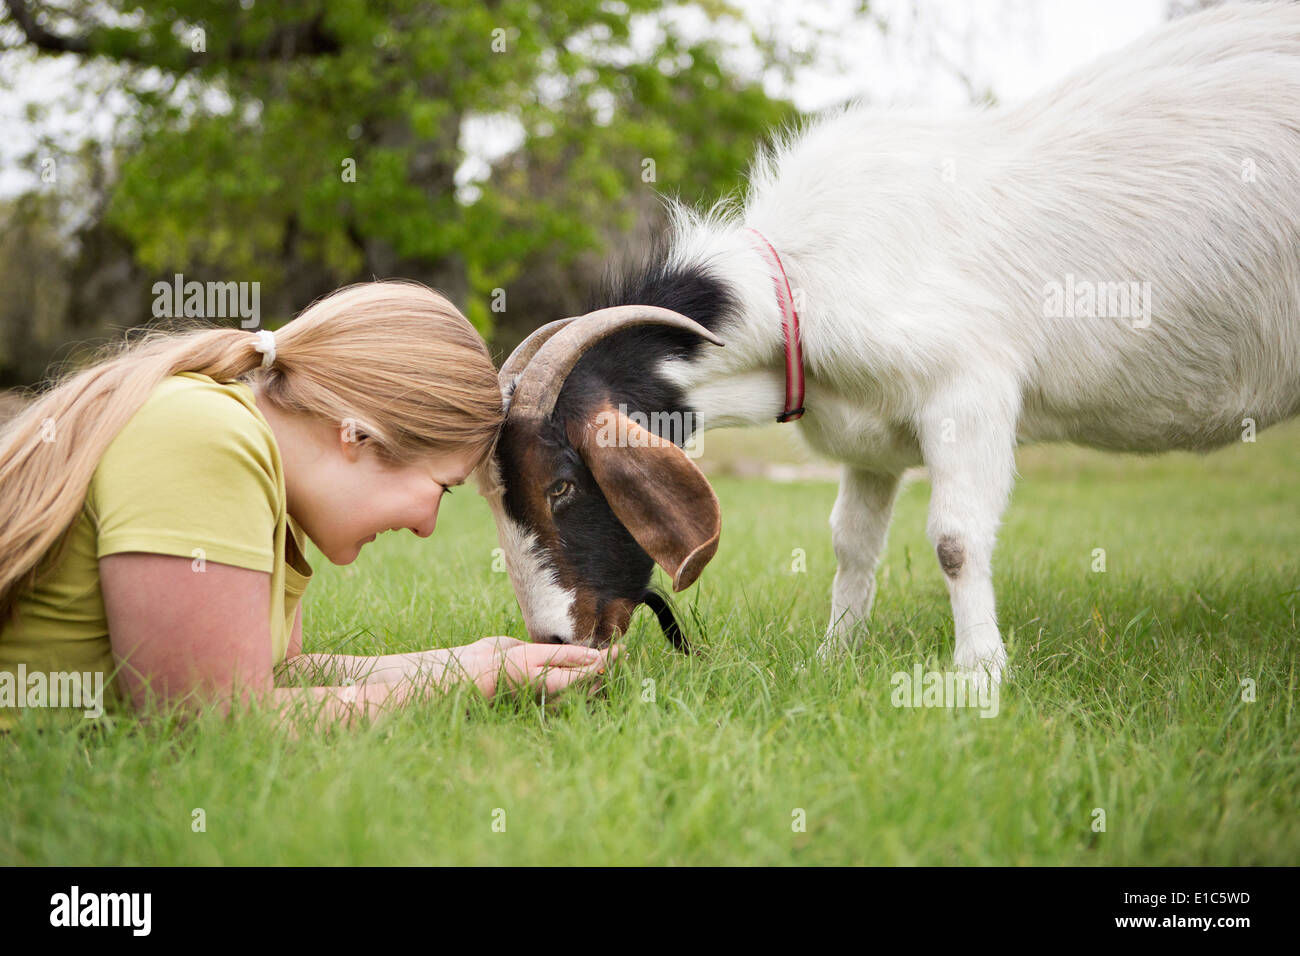 A girl lying on grass head to head with a goat. Stock Photo